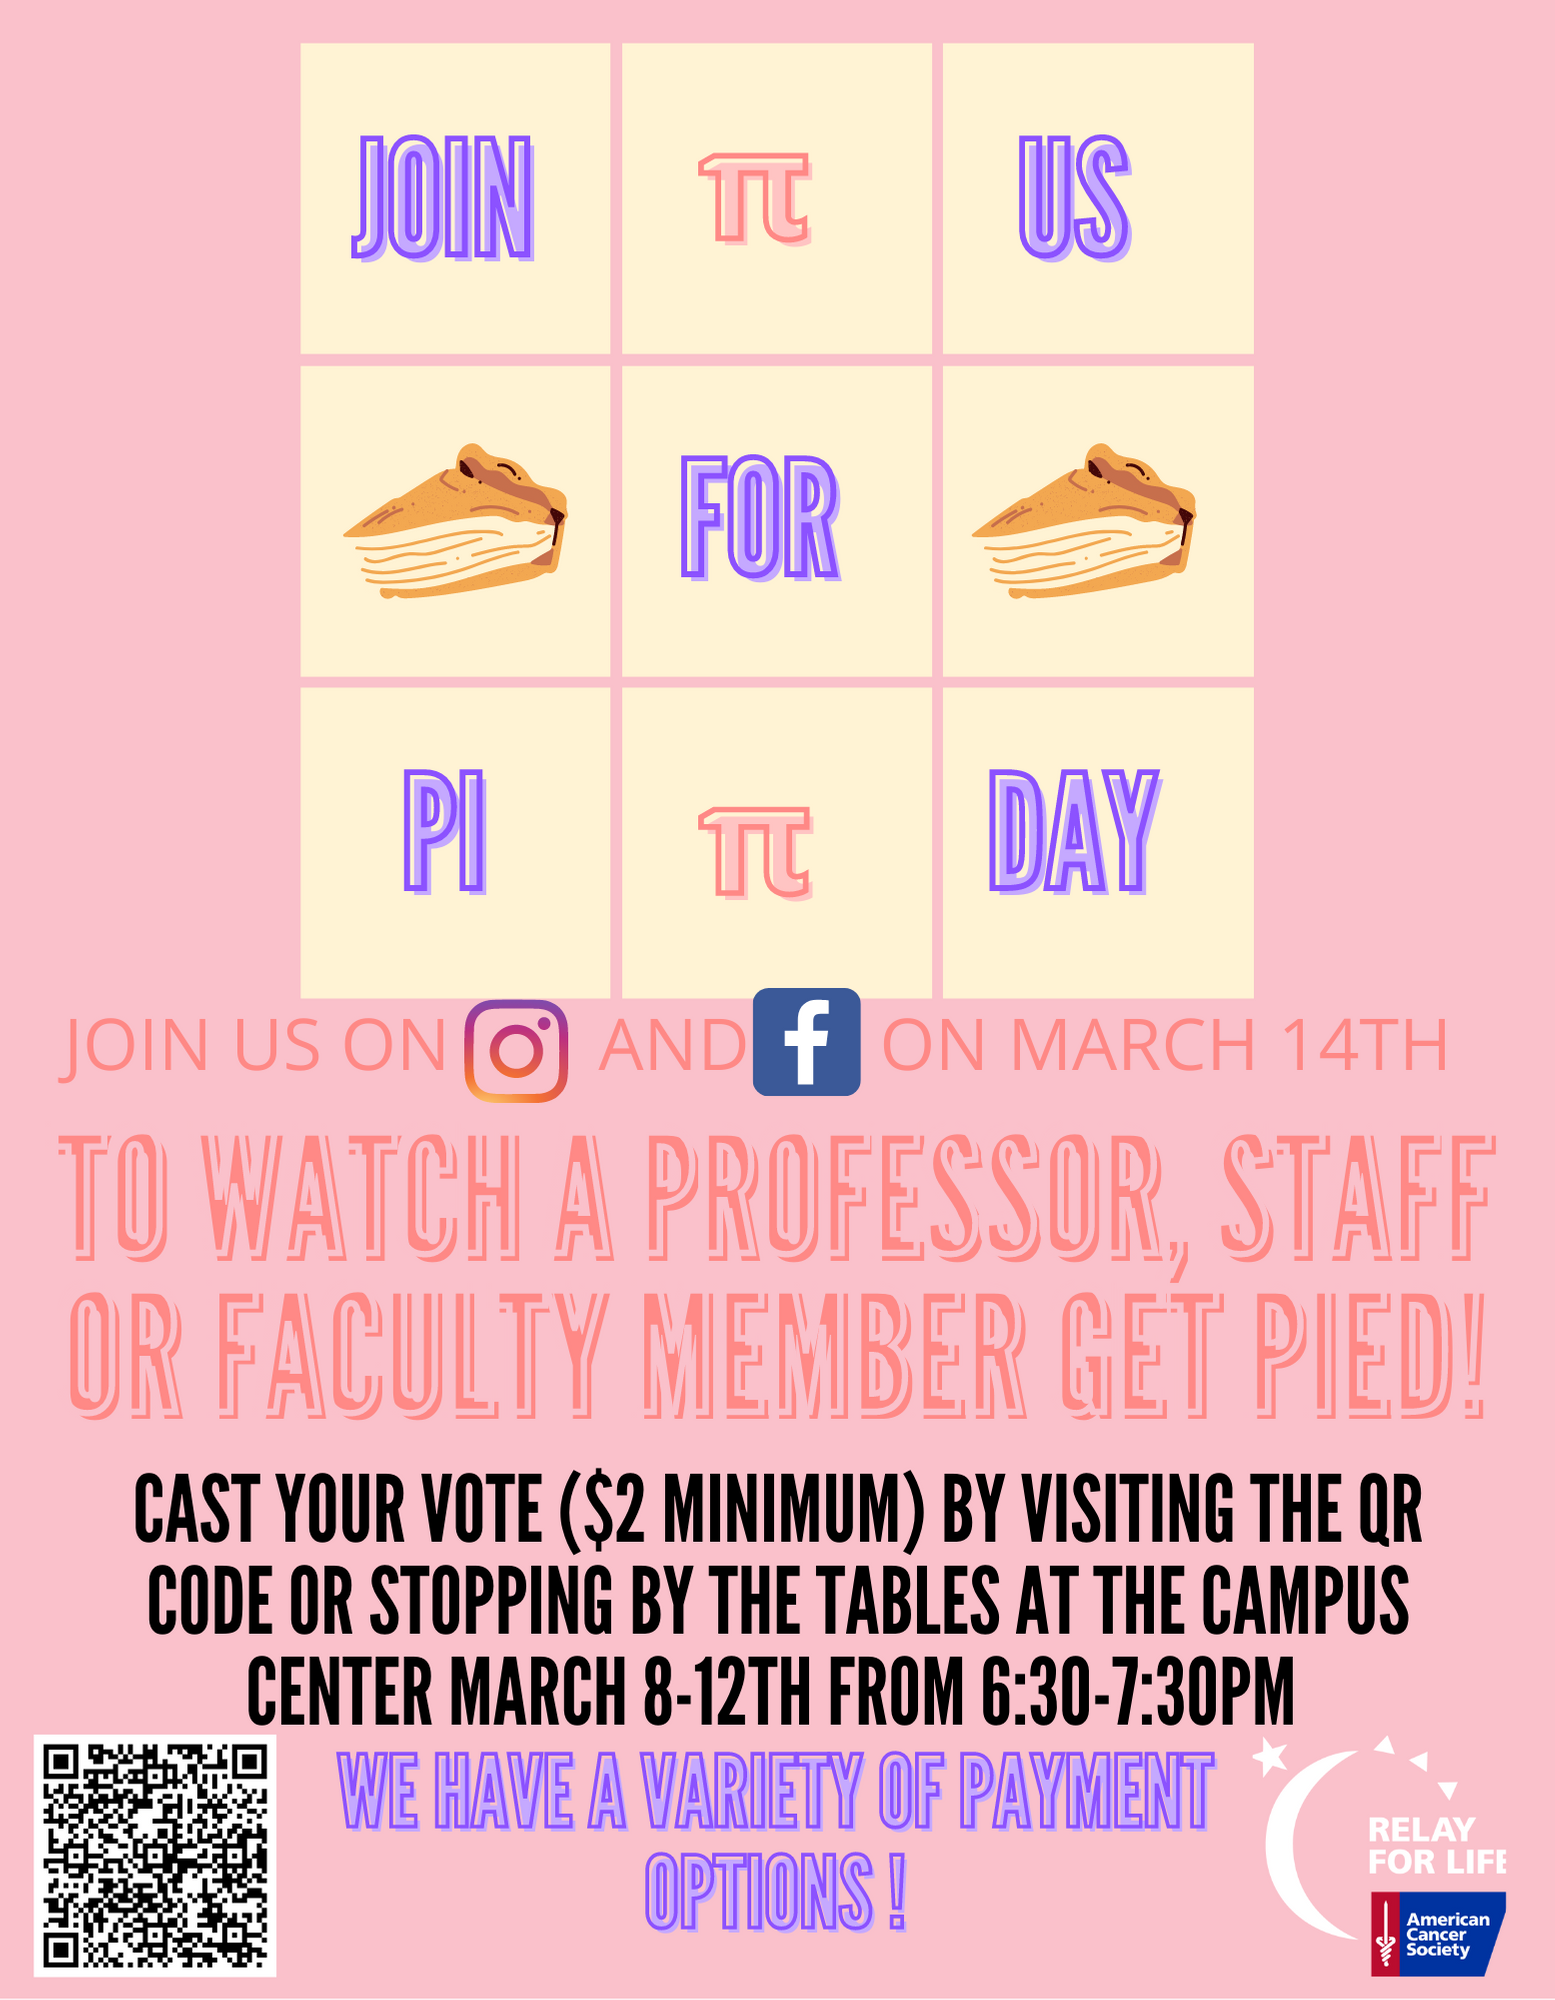 RFL Pi day Fundraiser! Donate to cast your vote for Angie Draheim, Joanne Goldwater, Alan Jamieson, Scott Mirabile, Sahar Shafqat, or Laurie Scherer!